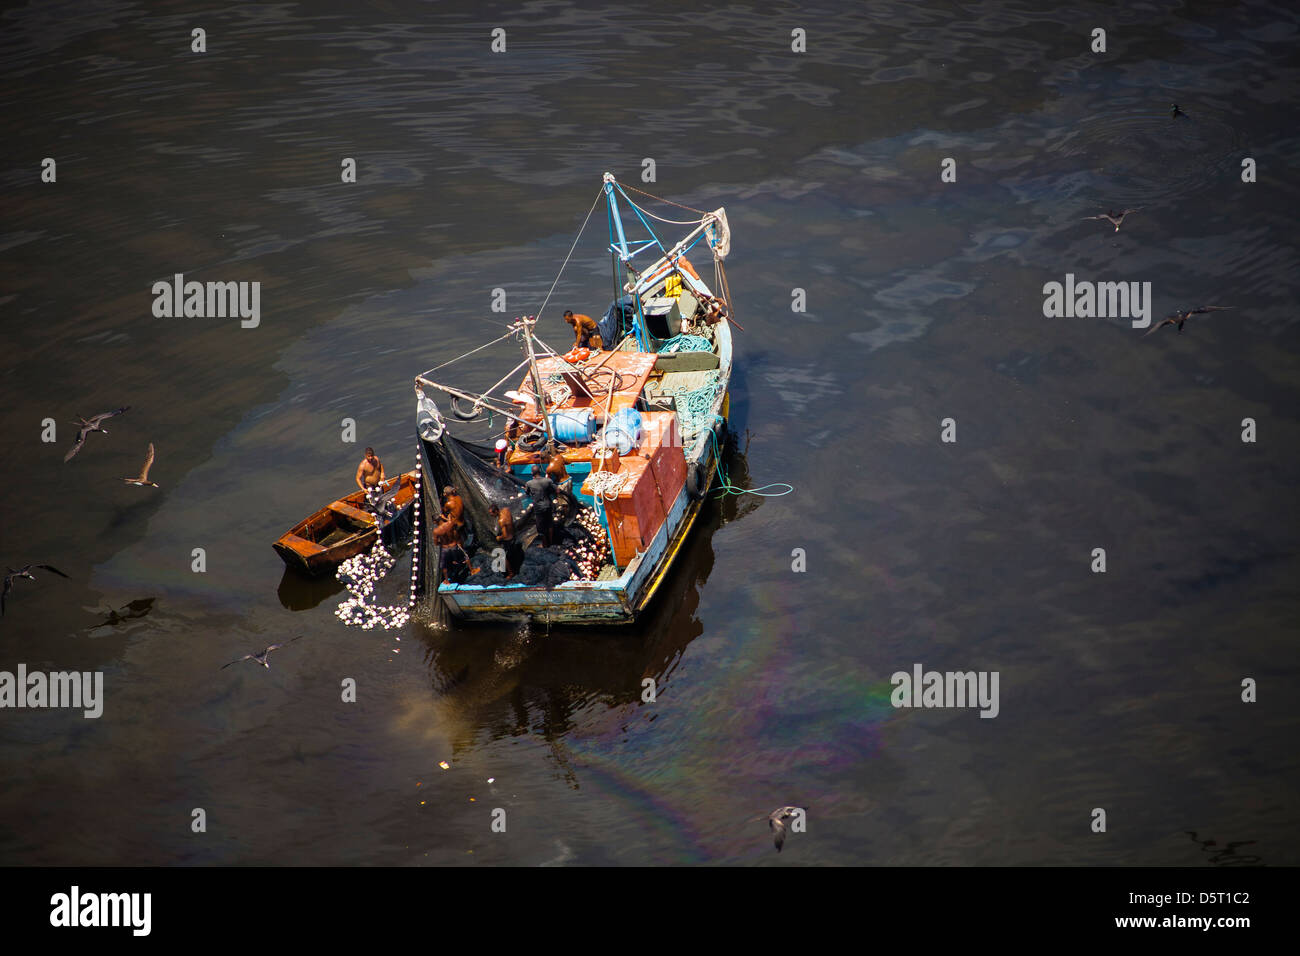 Small fishing boat at the polluted waters of Guanabara Bay, Rio de Janeiro, Brazil. Oil spill near Paqueta island. Stock Photo